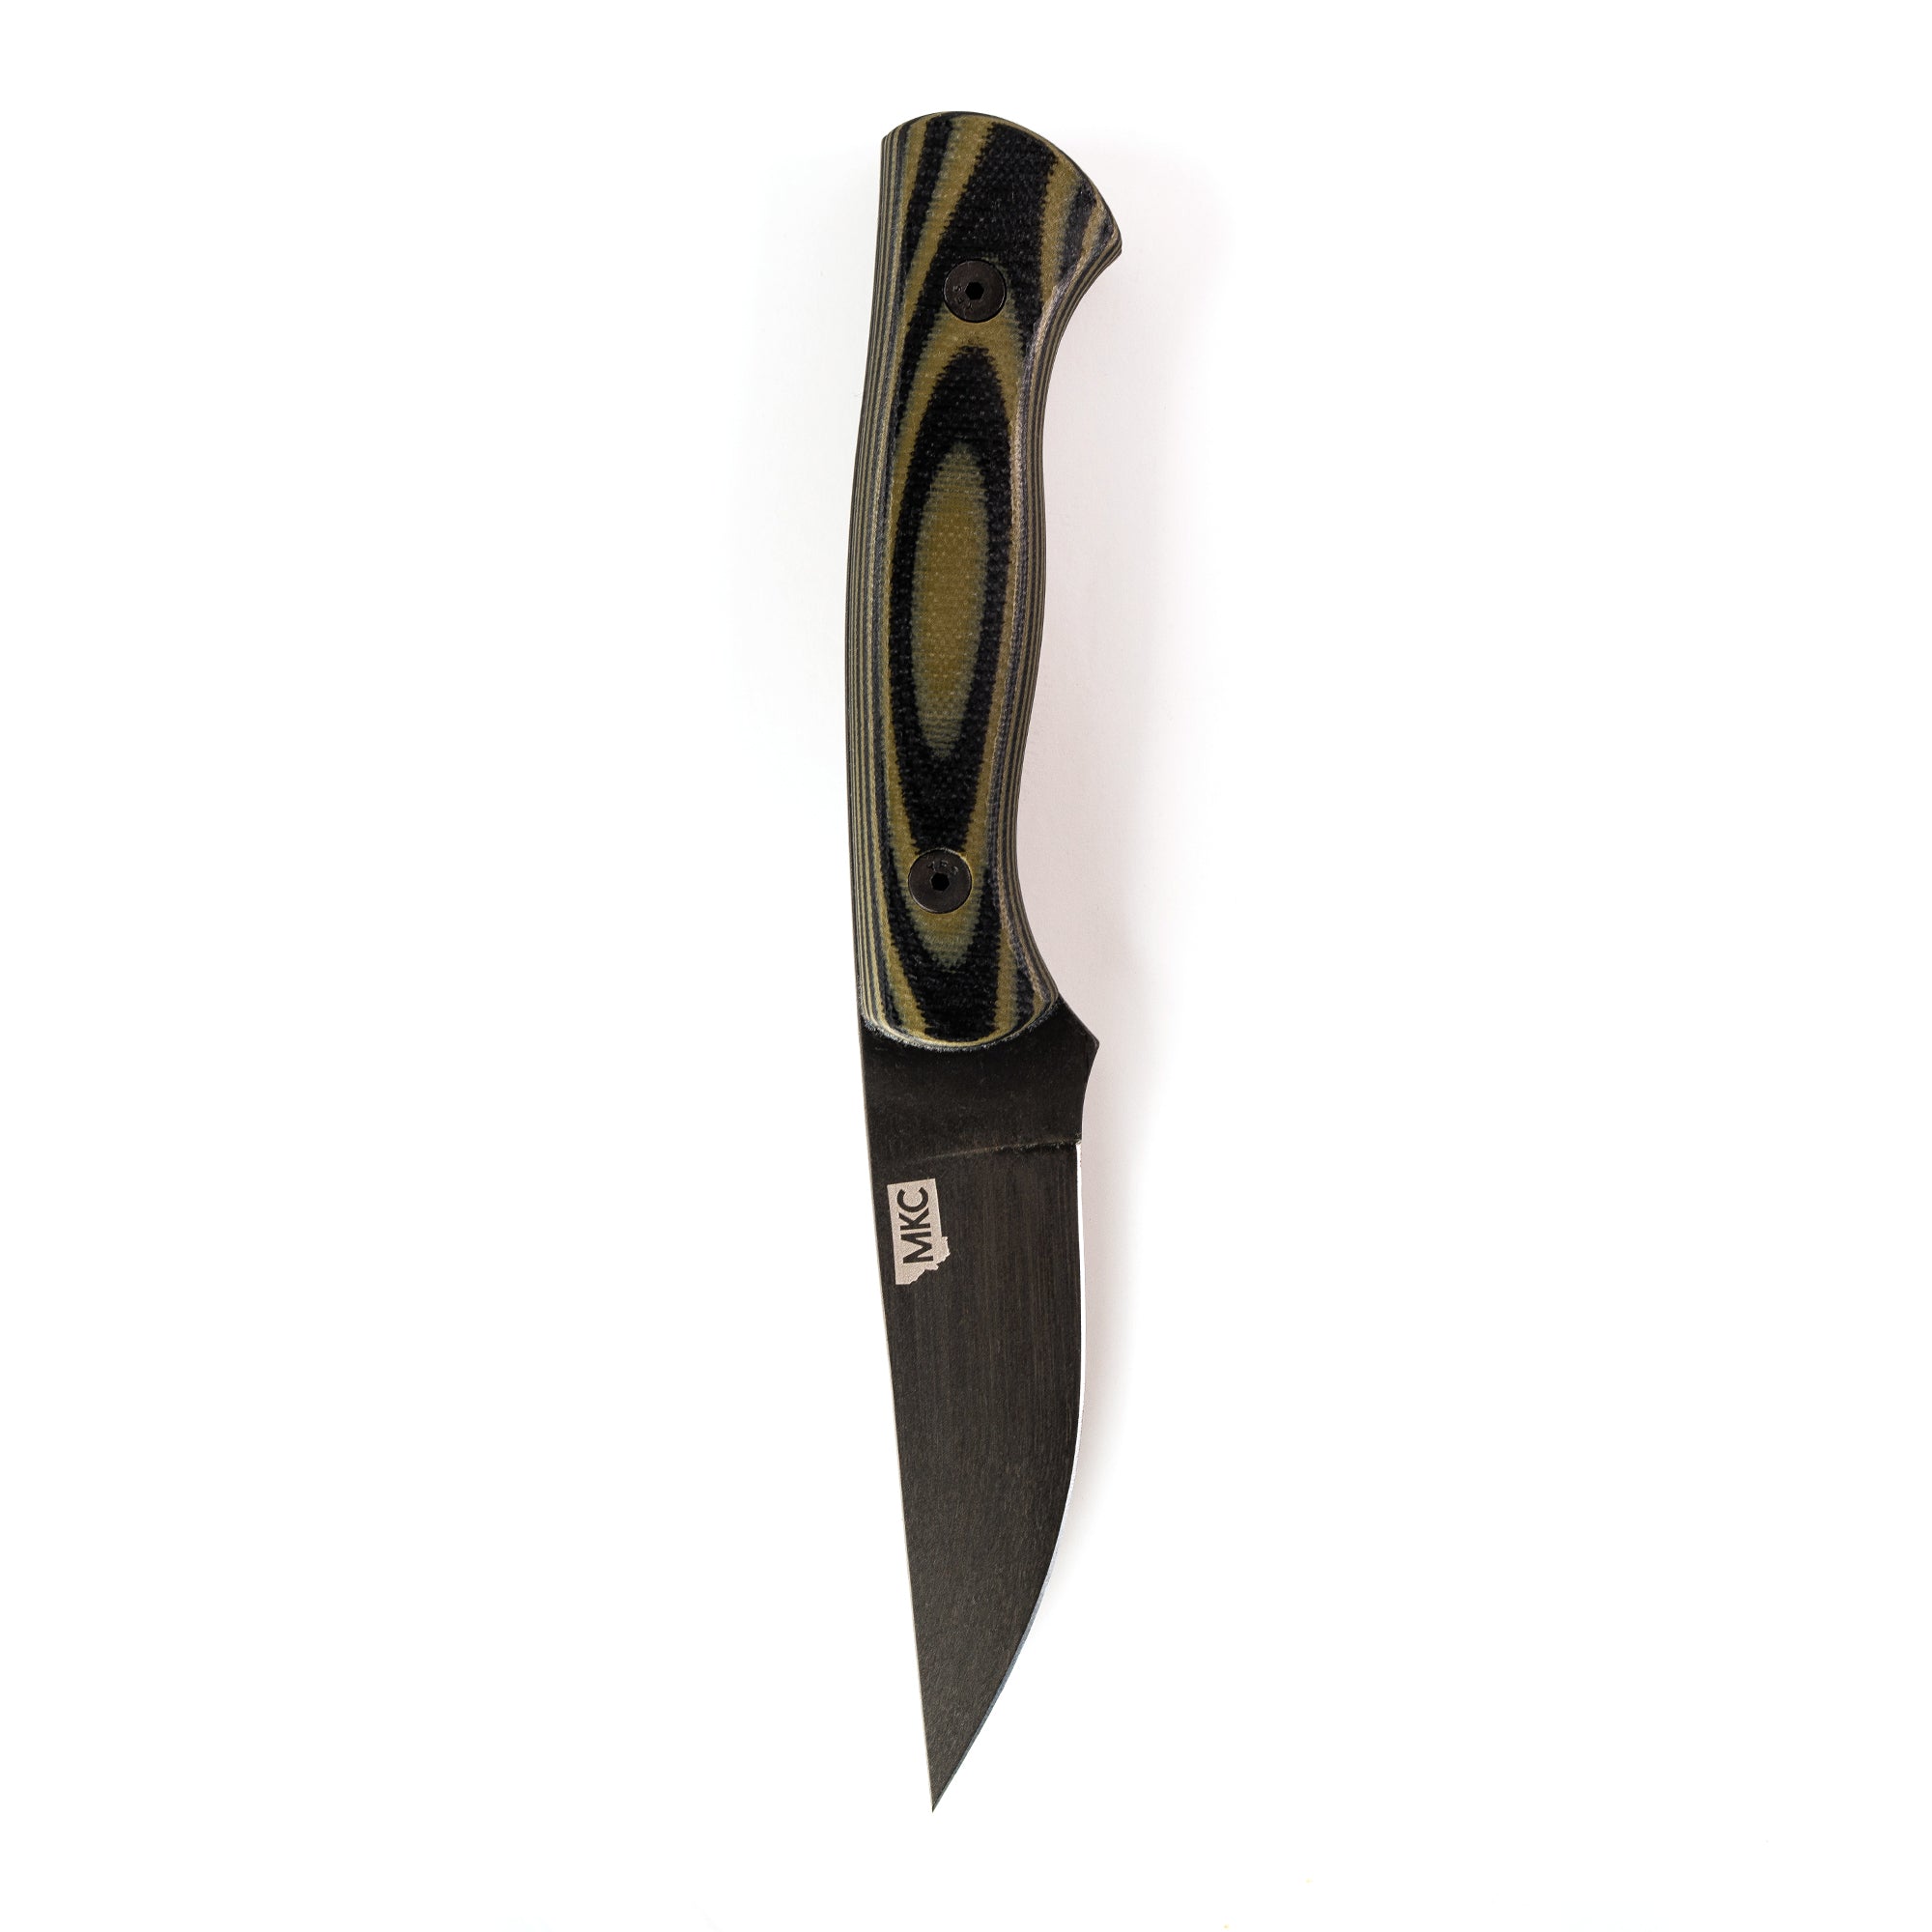 THE BLACKFOOT FIXED BLADE 2.0 - GREEN AND BLACK